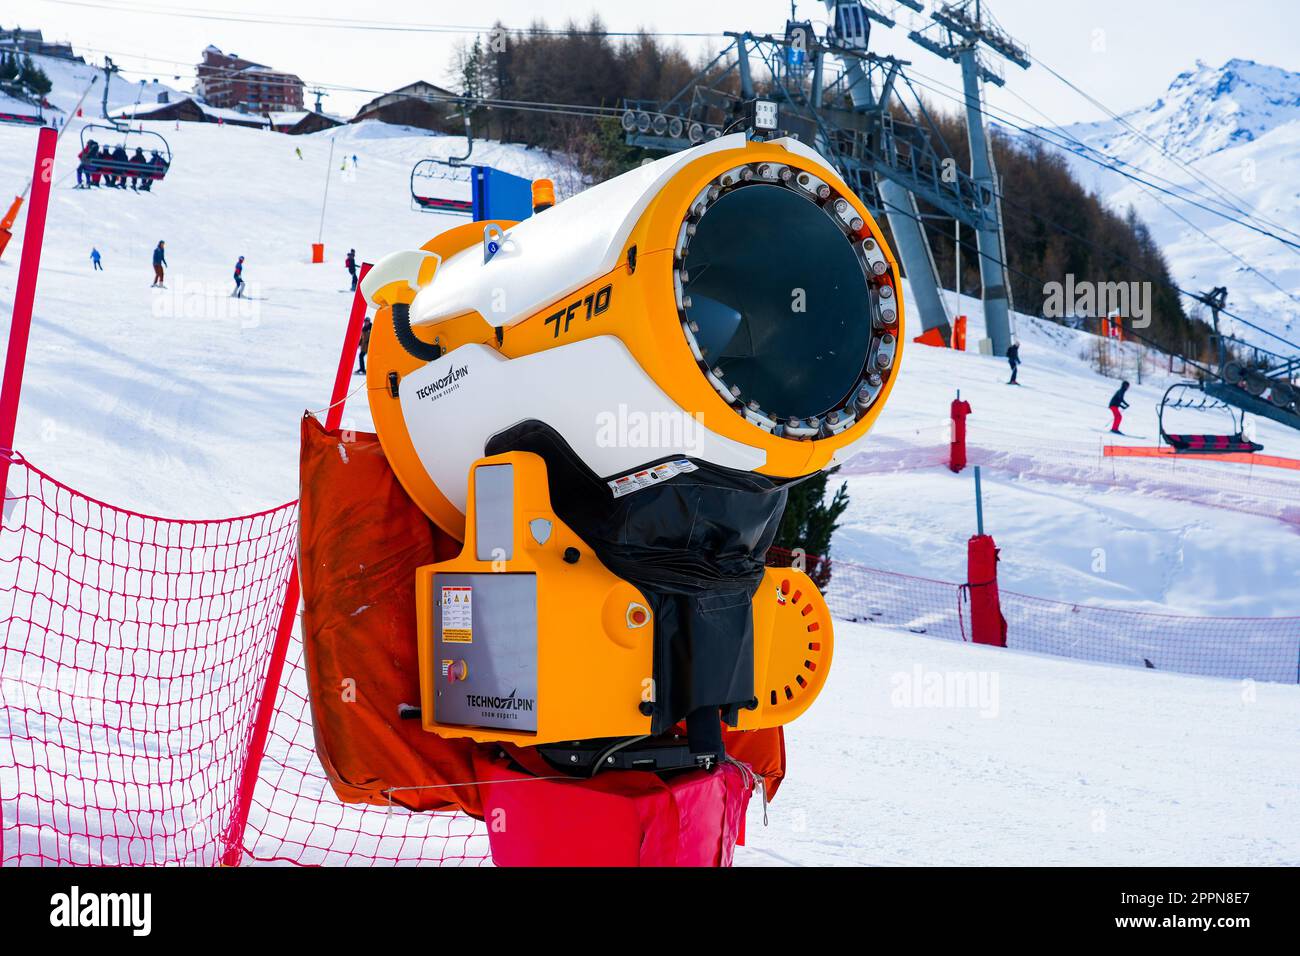 https://c8.alamy.com/comp/2PPN8E7/les-mnuires-france-march-16-2023-yellow-snowmaker-used-to-make-artificial-snow-in-les-mnuires-ski-resort-in-the-french-alps-snow-gun-with-a-2PPN8E7.jpg